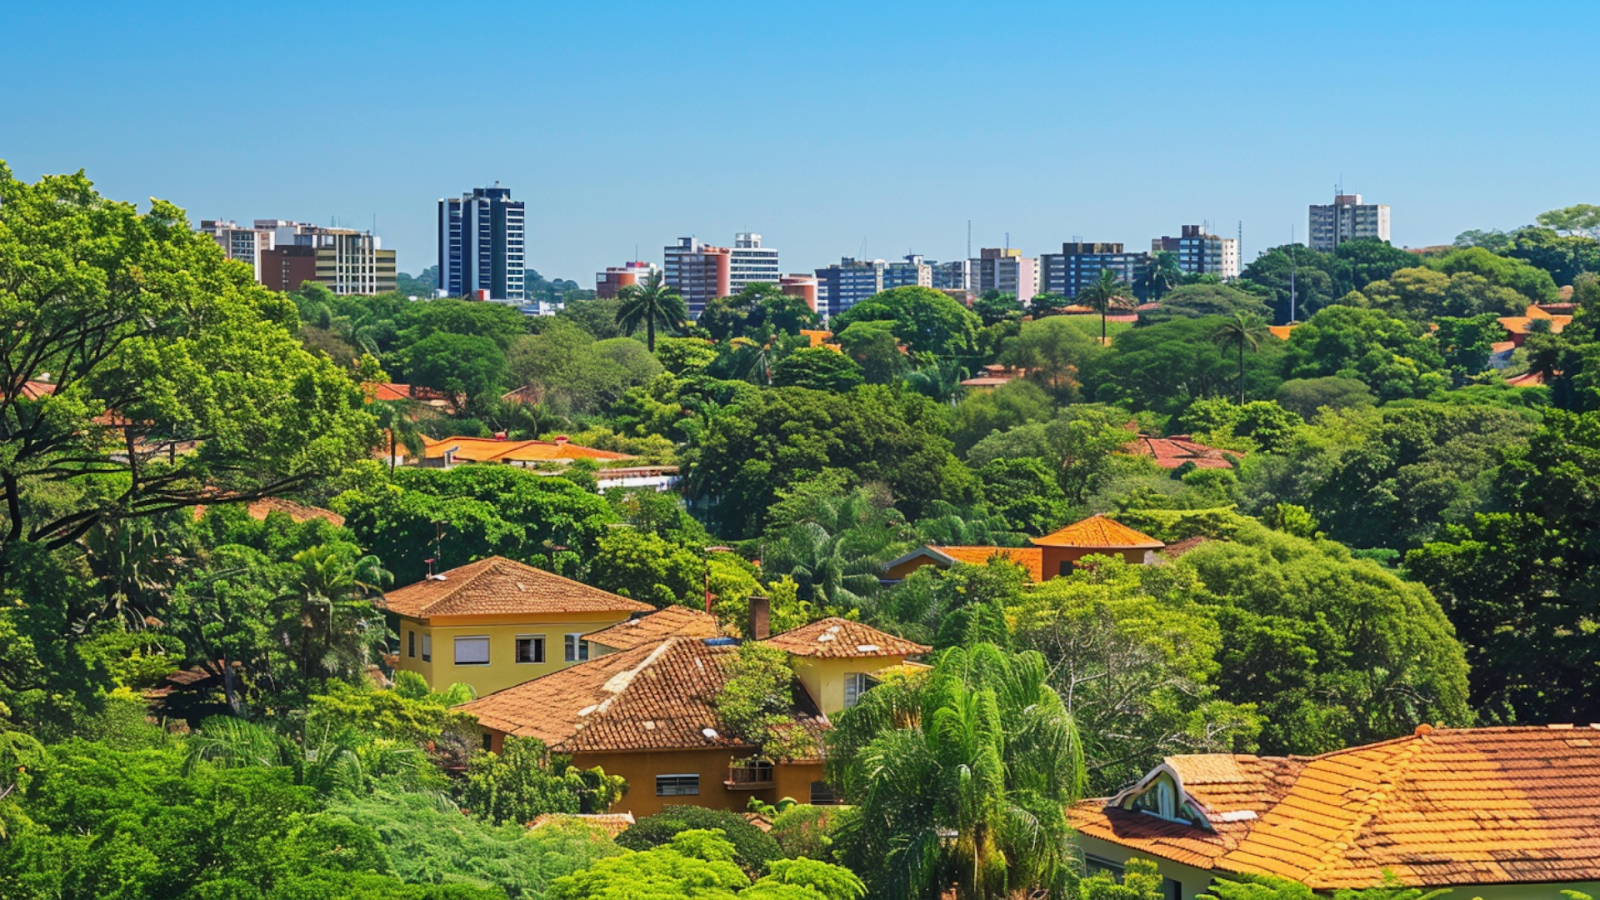 Modern buildings with trees and houses in the foreground in Sao Paulo, Brazil